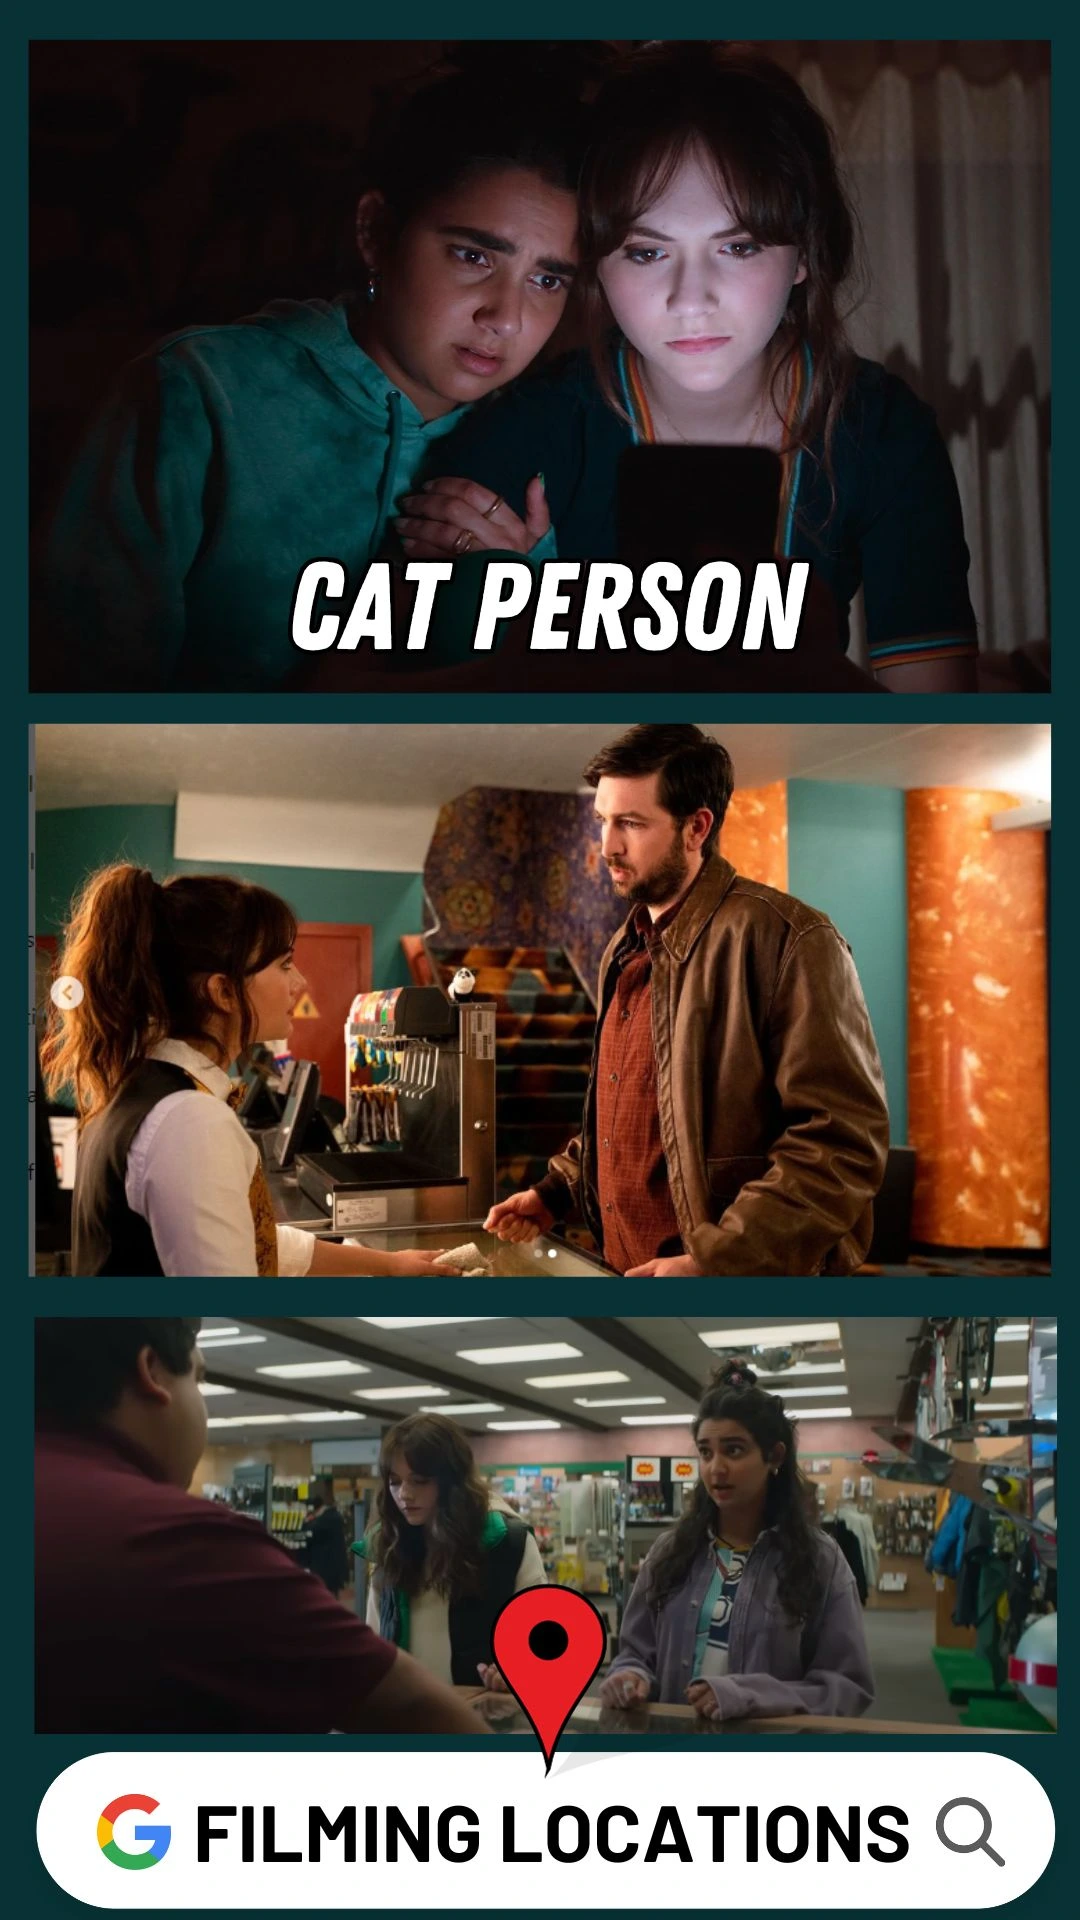 Cat Person Filming Locations